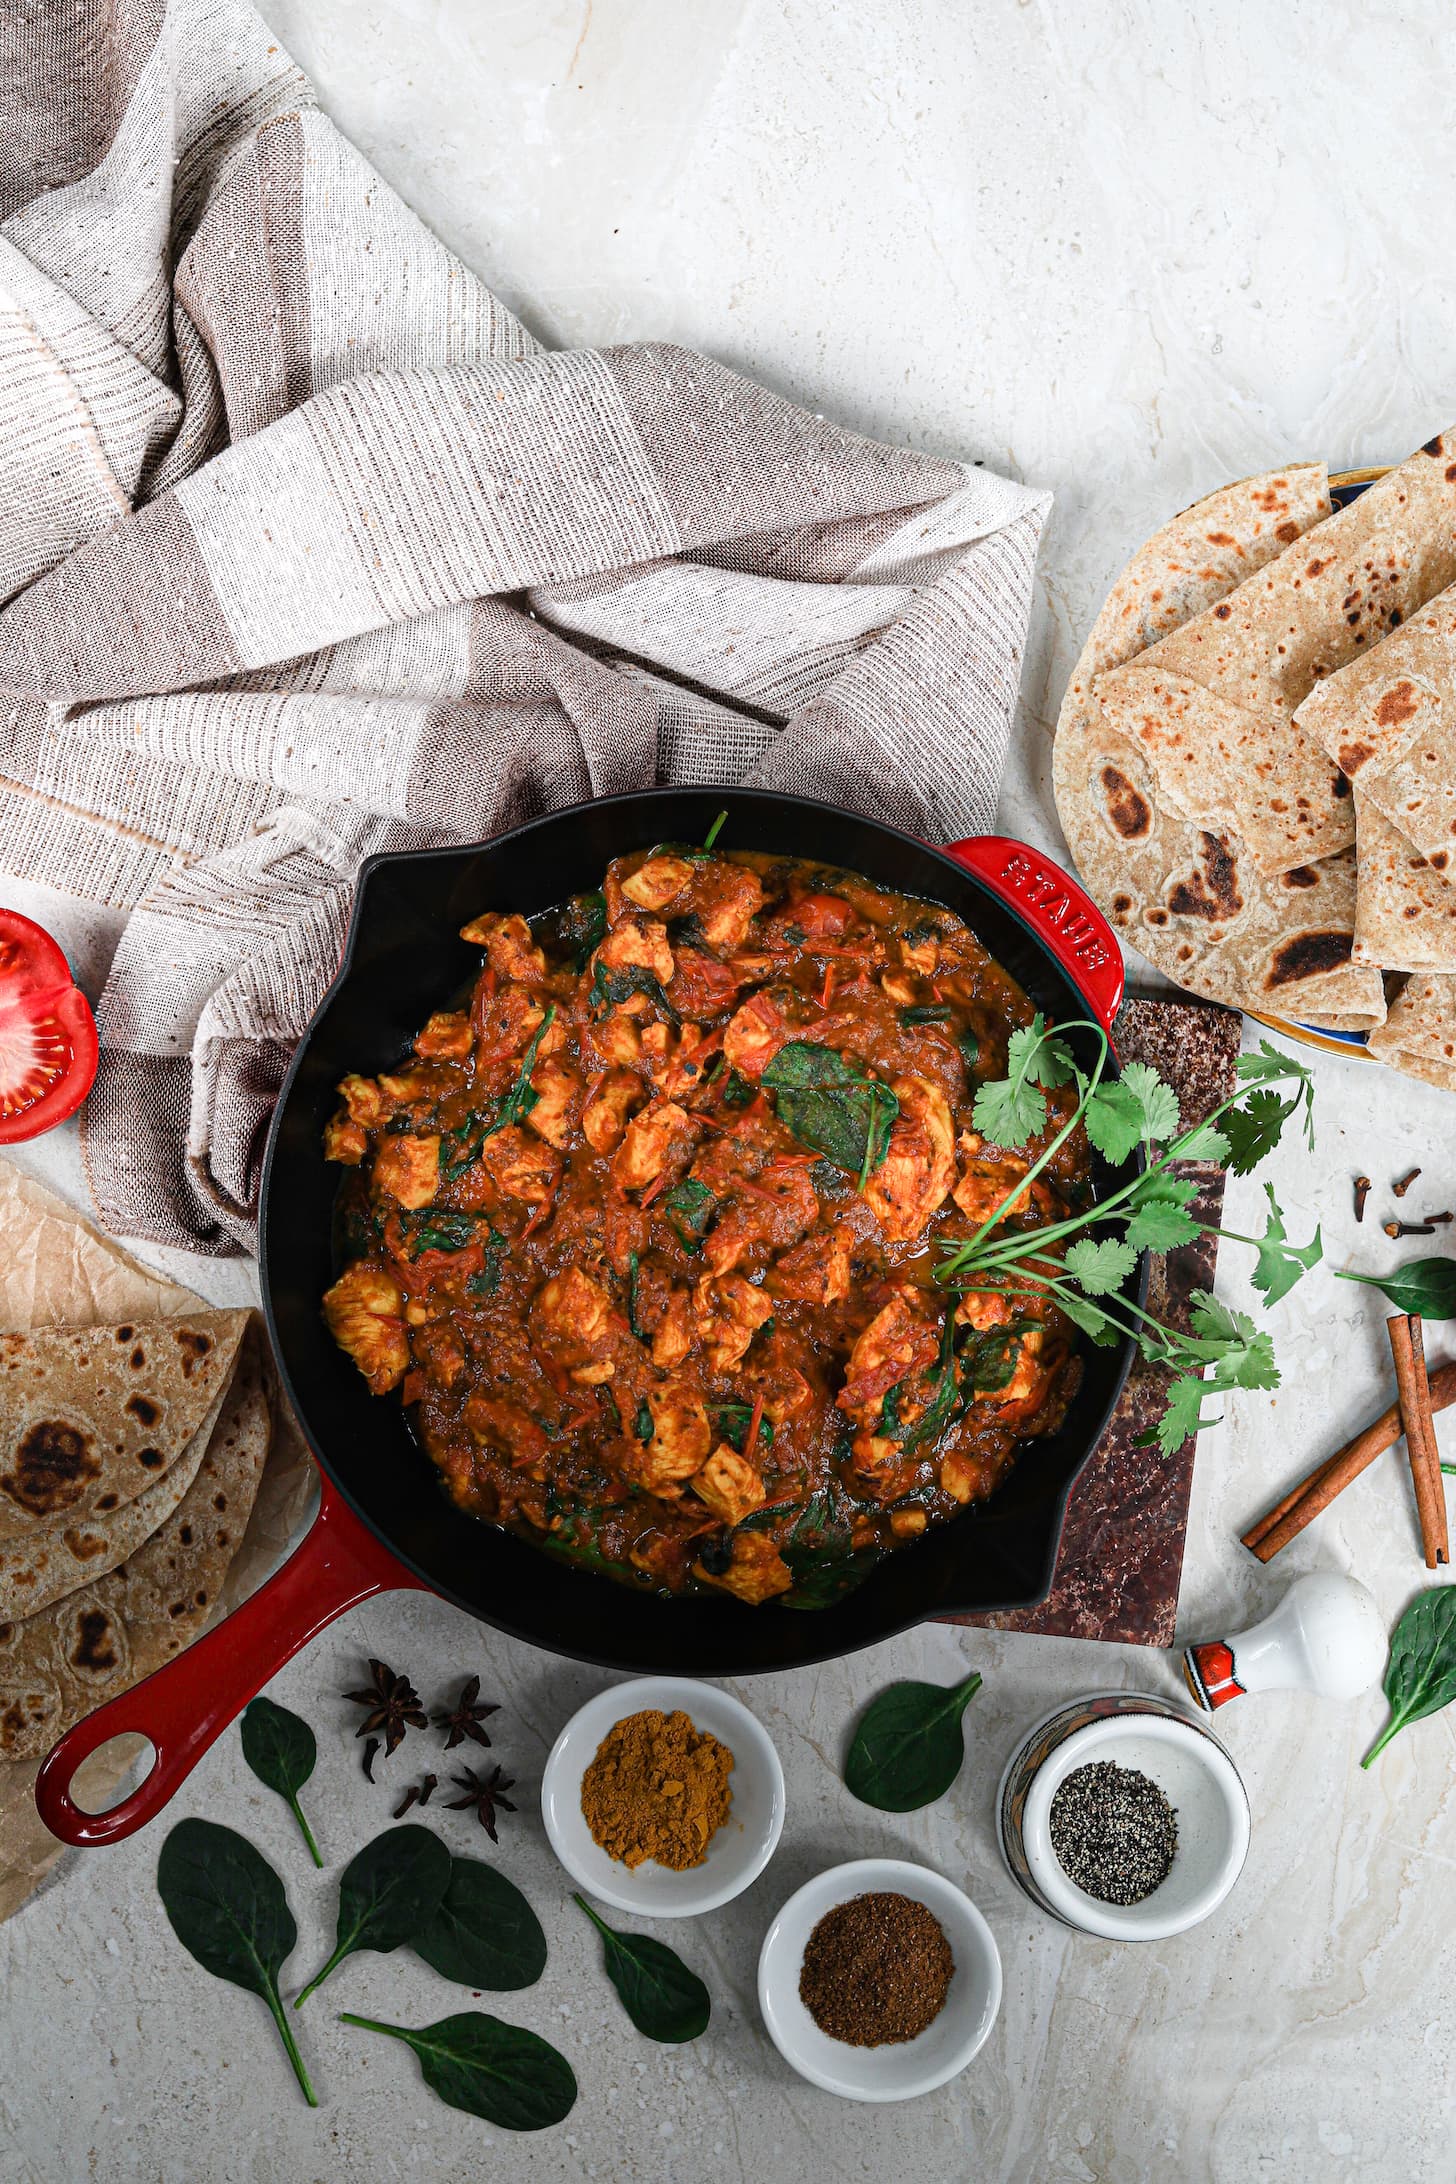 a red pan of chicken curry surrounded by roti (traditional Indian flatbread) and ramekins of spices.